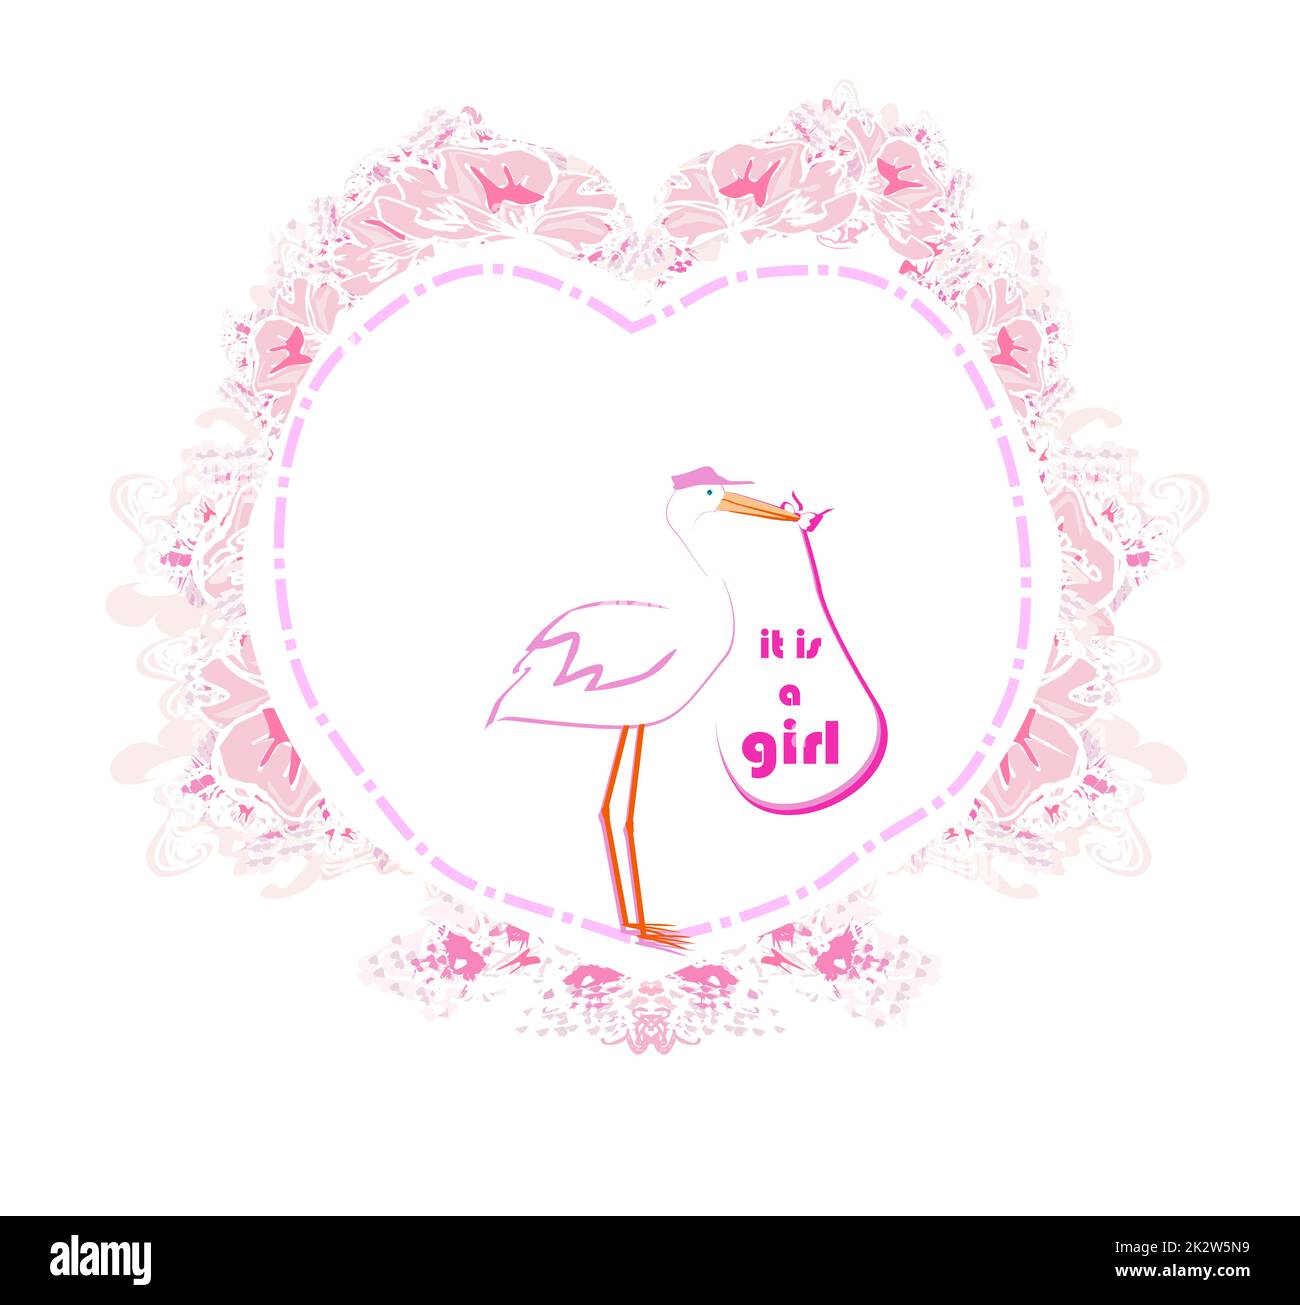 Baby girl Card - A stork delivering a baby girl. Stock Photo